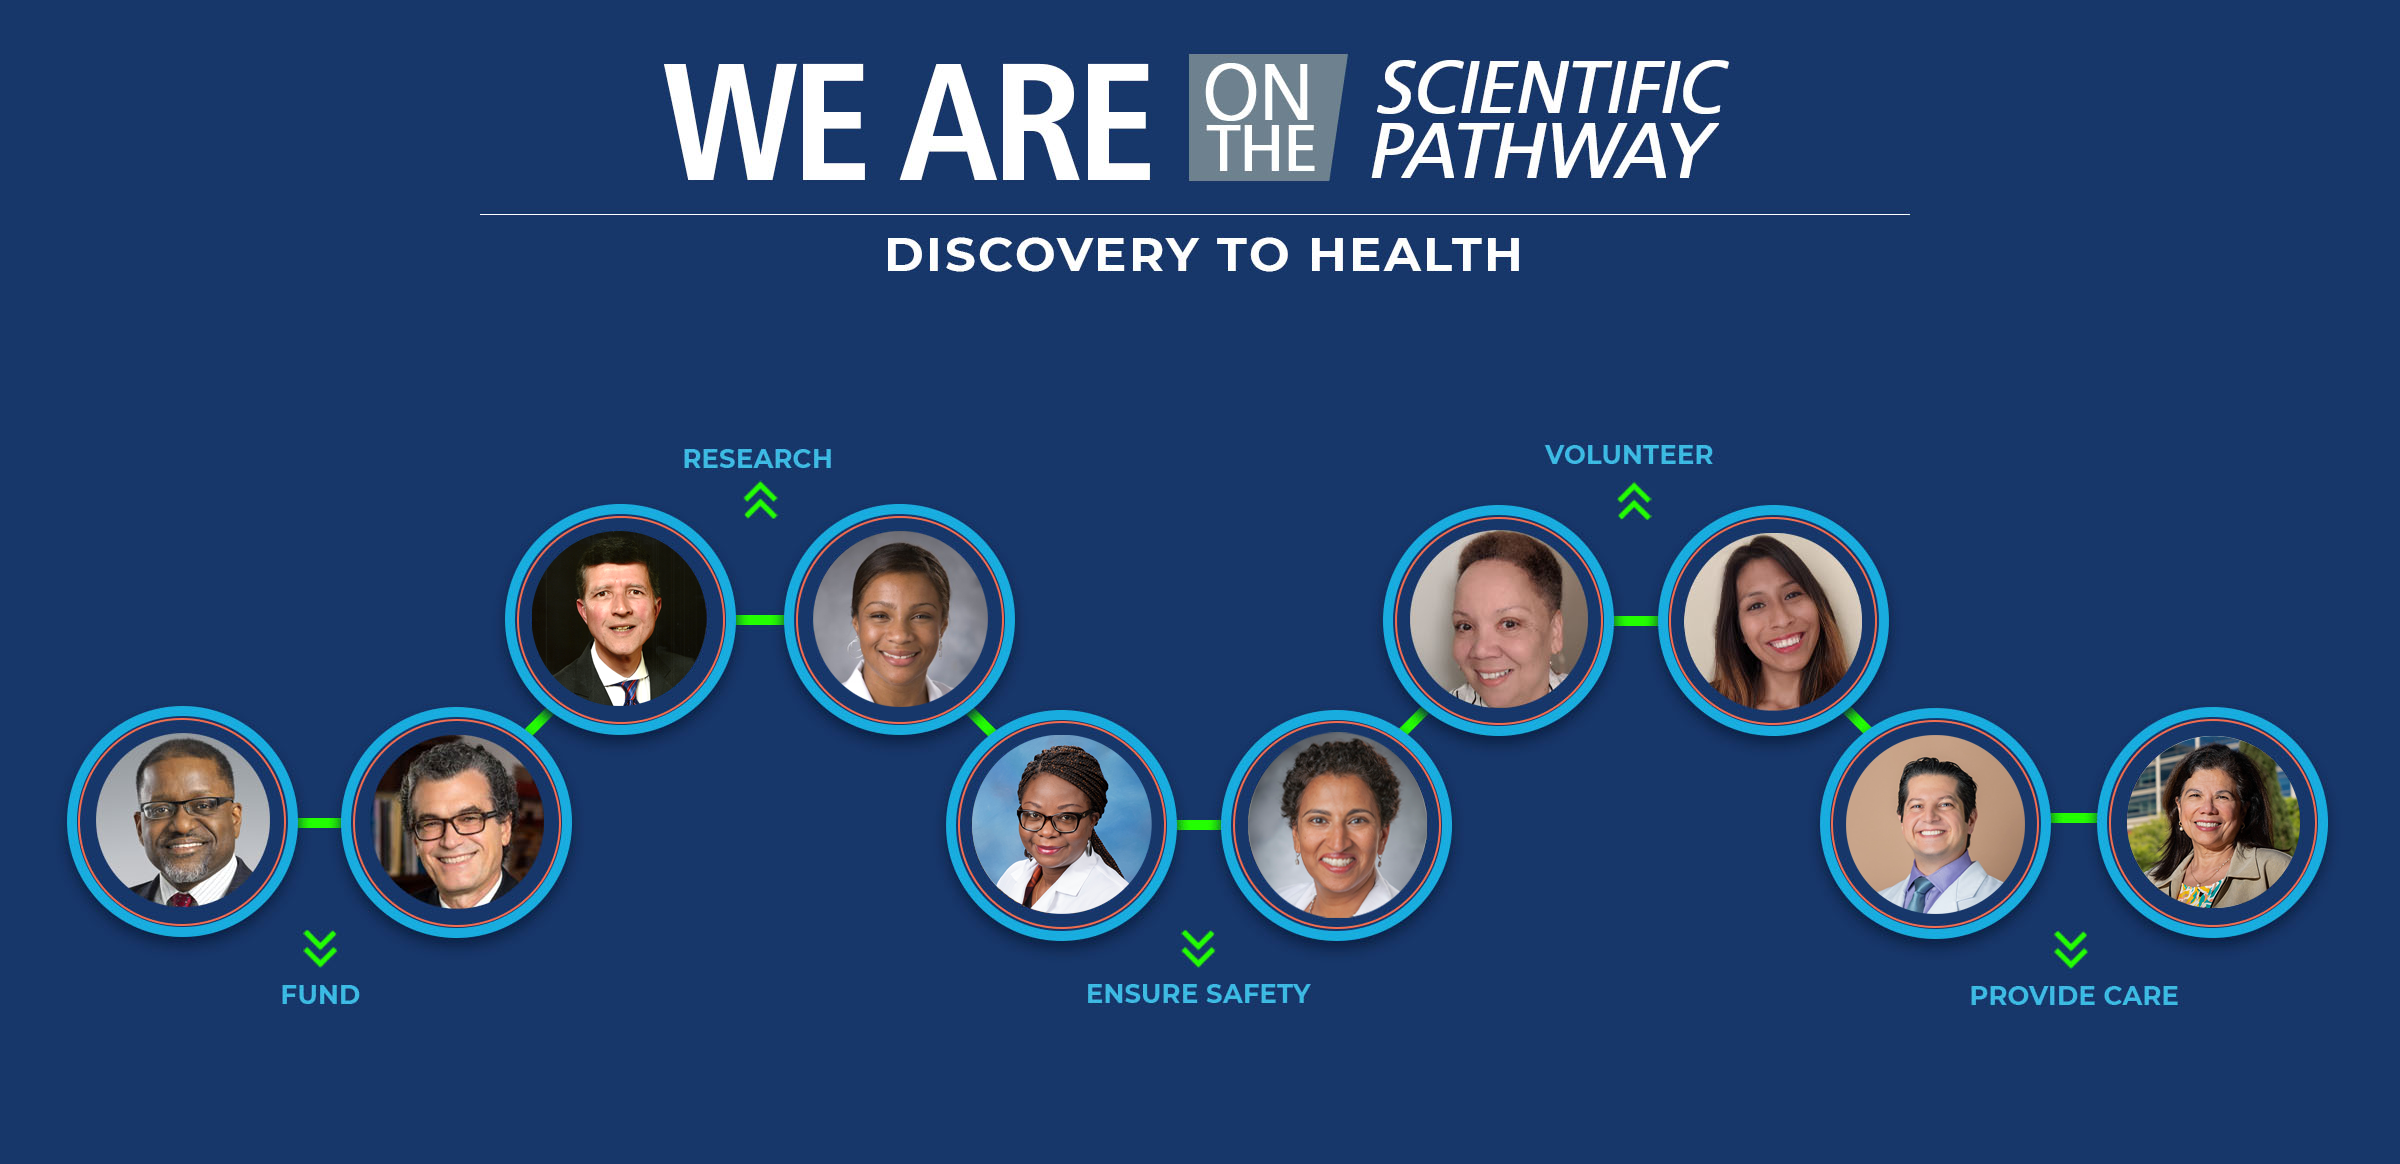 We are on the Scientific Pathway, Discovery to Health